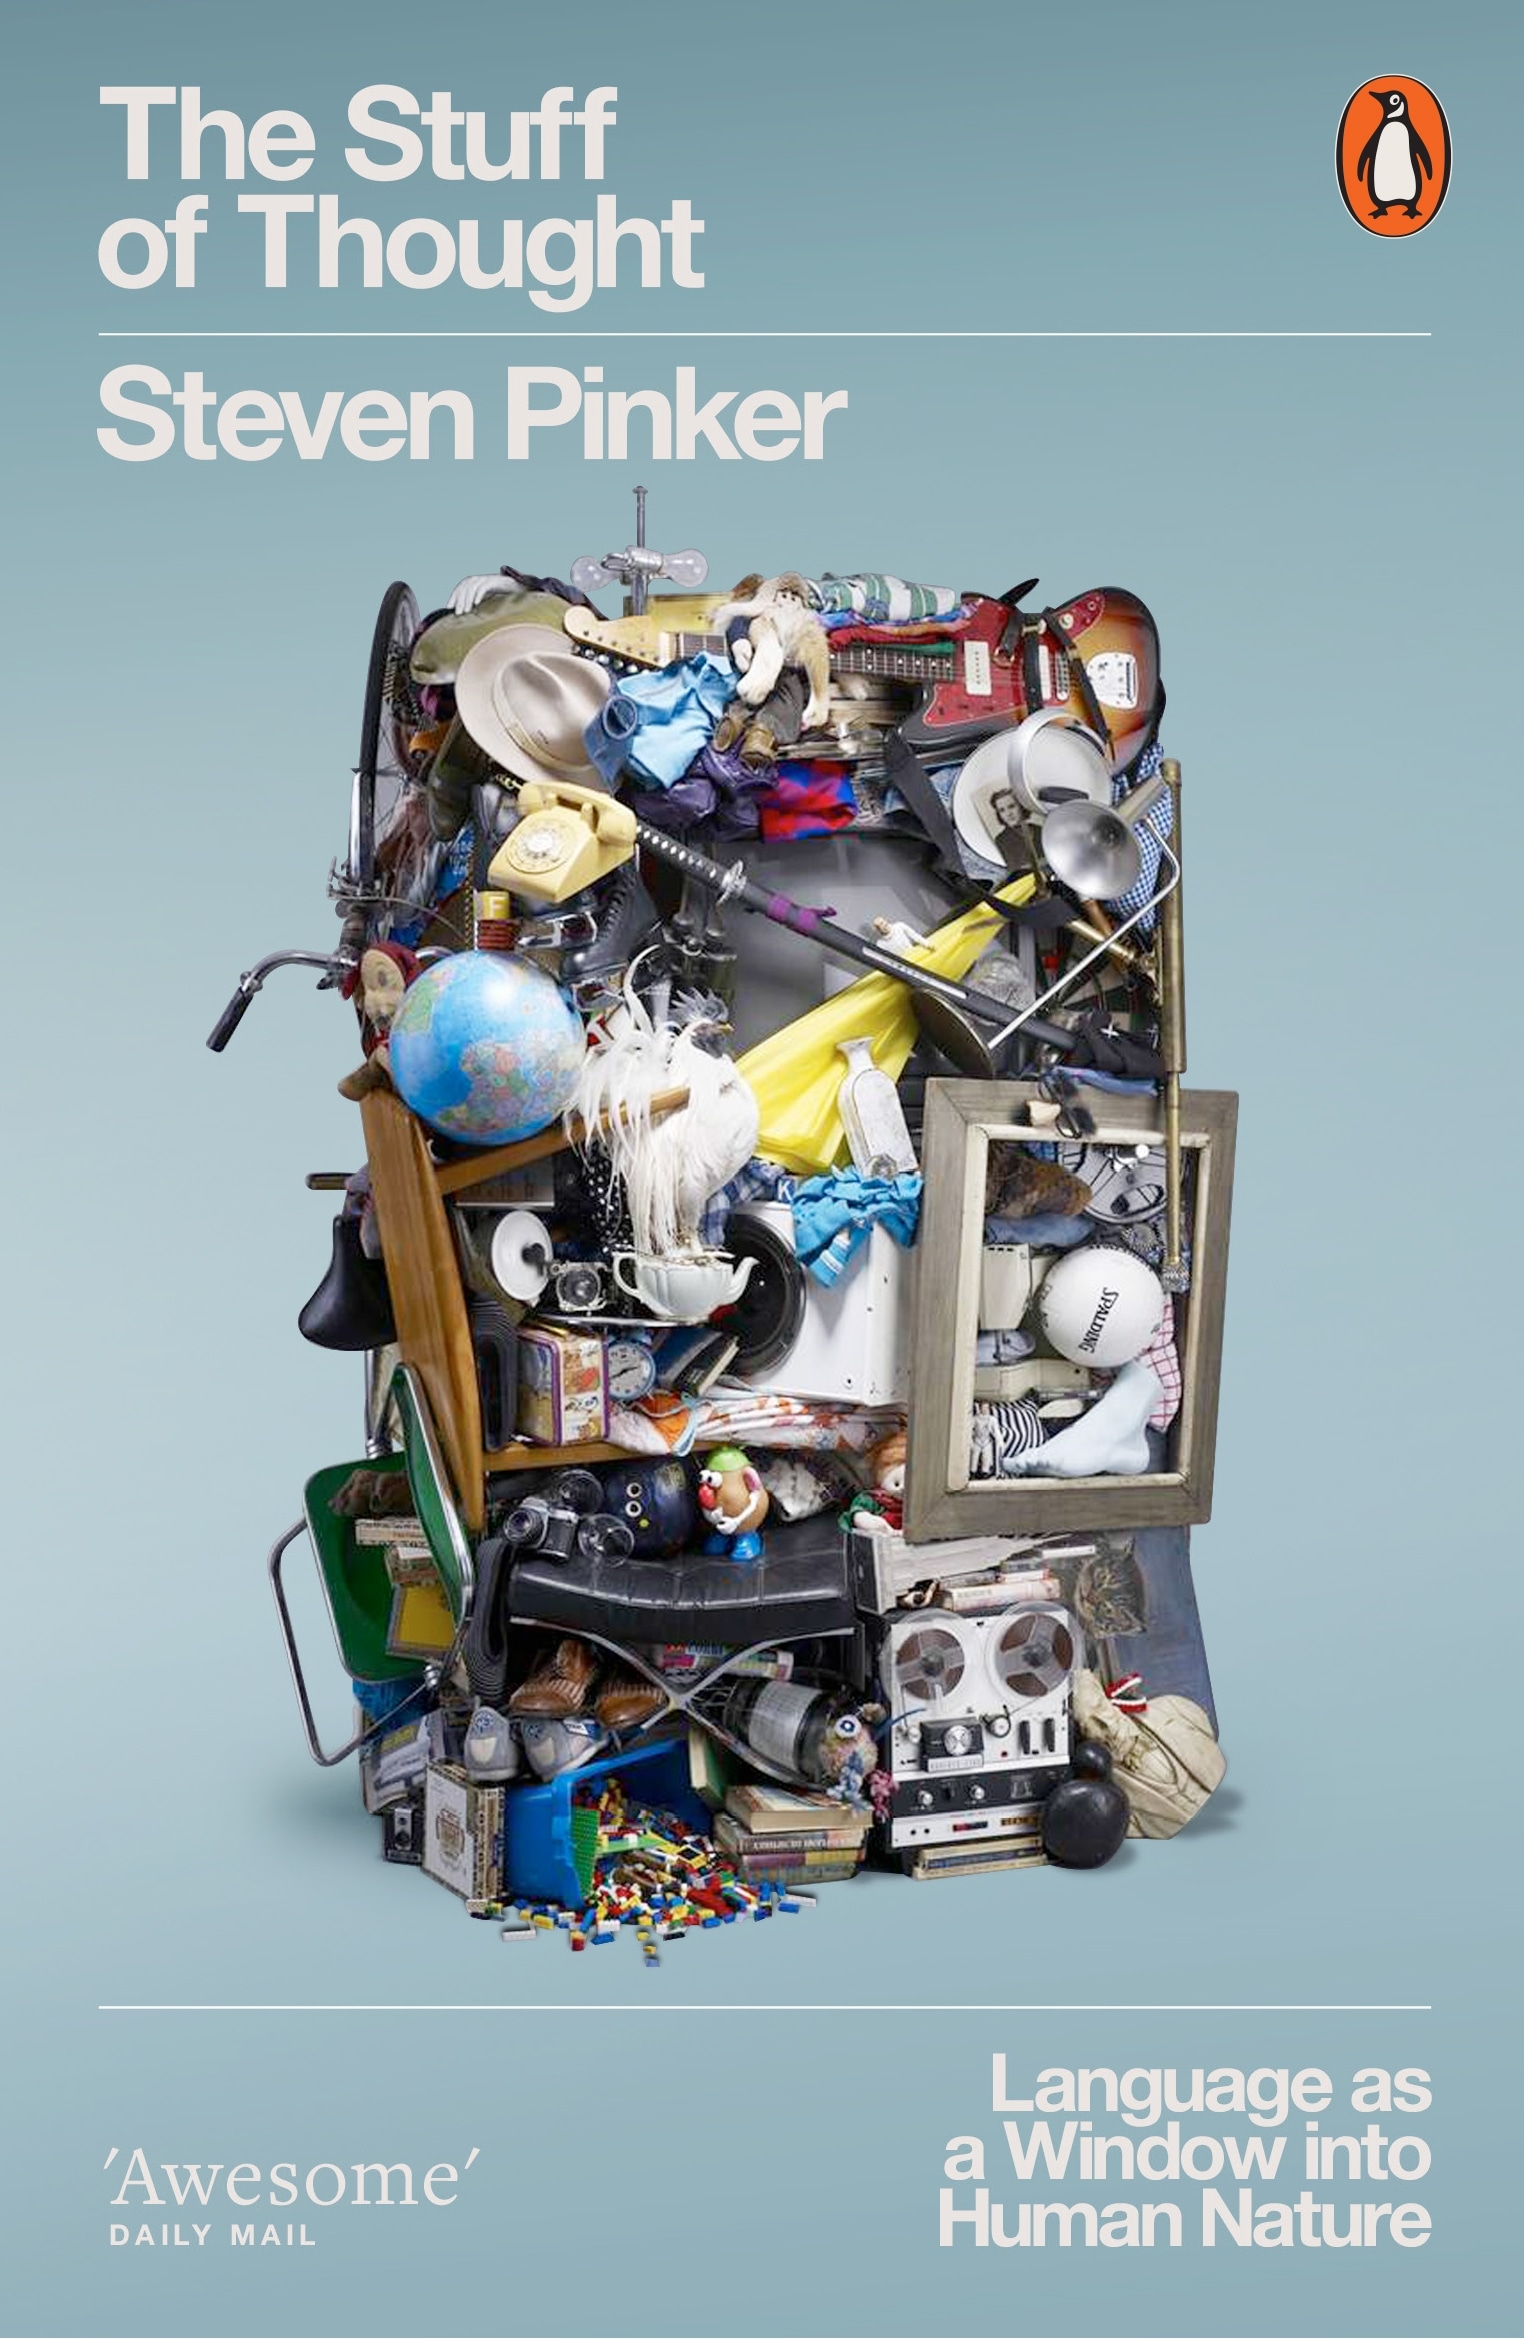 Book “The Stuff of Thought” by Steven Pinker